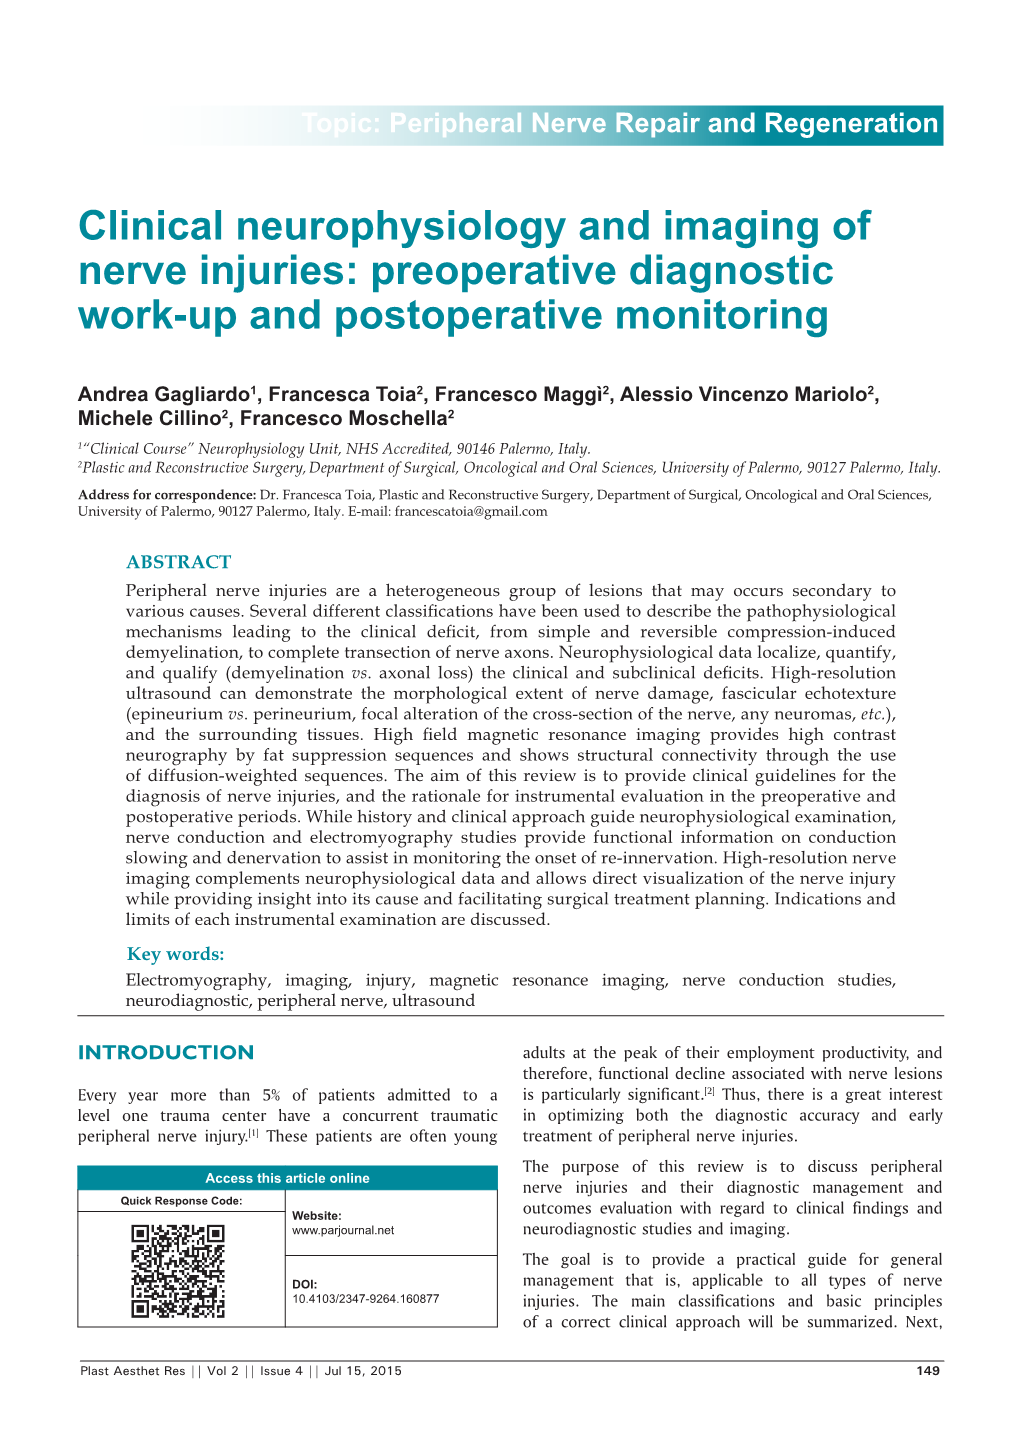 Clinical Neurophysiology and Imaging of Nerve Injuries: Preoperative Diagnostic Work‑Up and Postoperative Monitoring